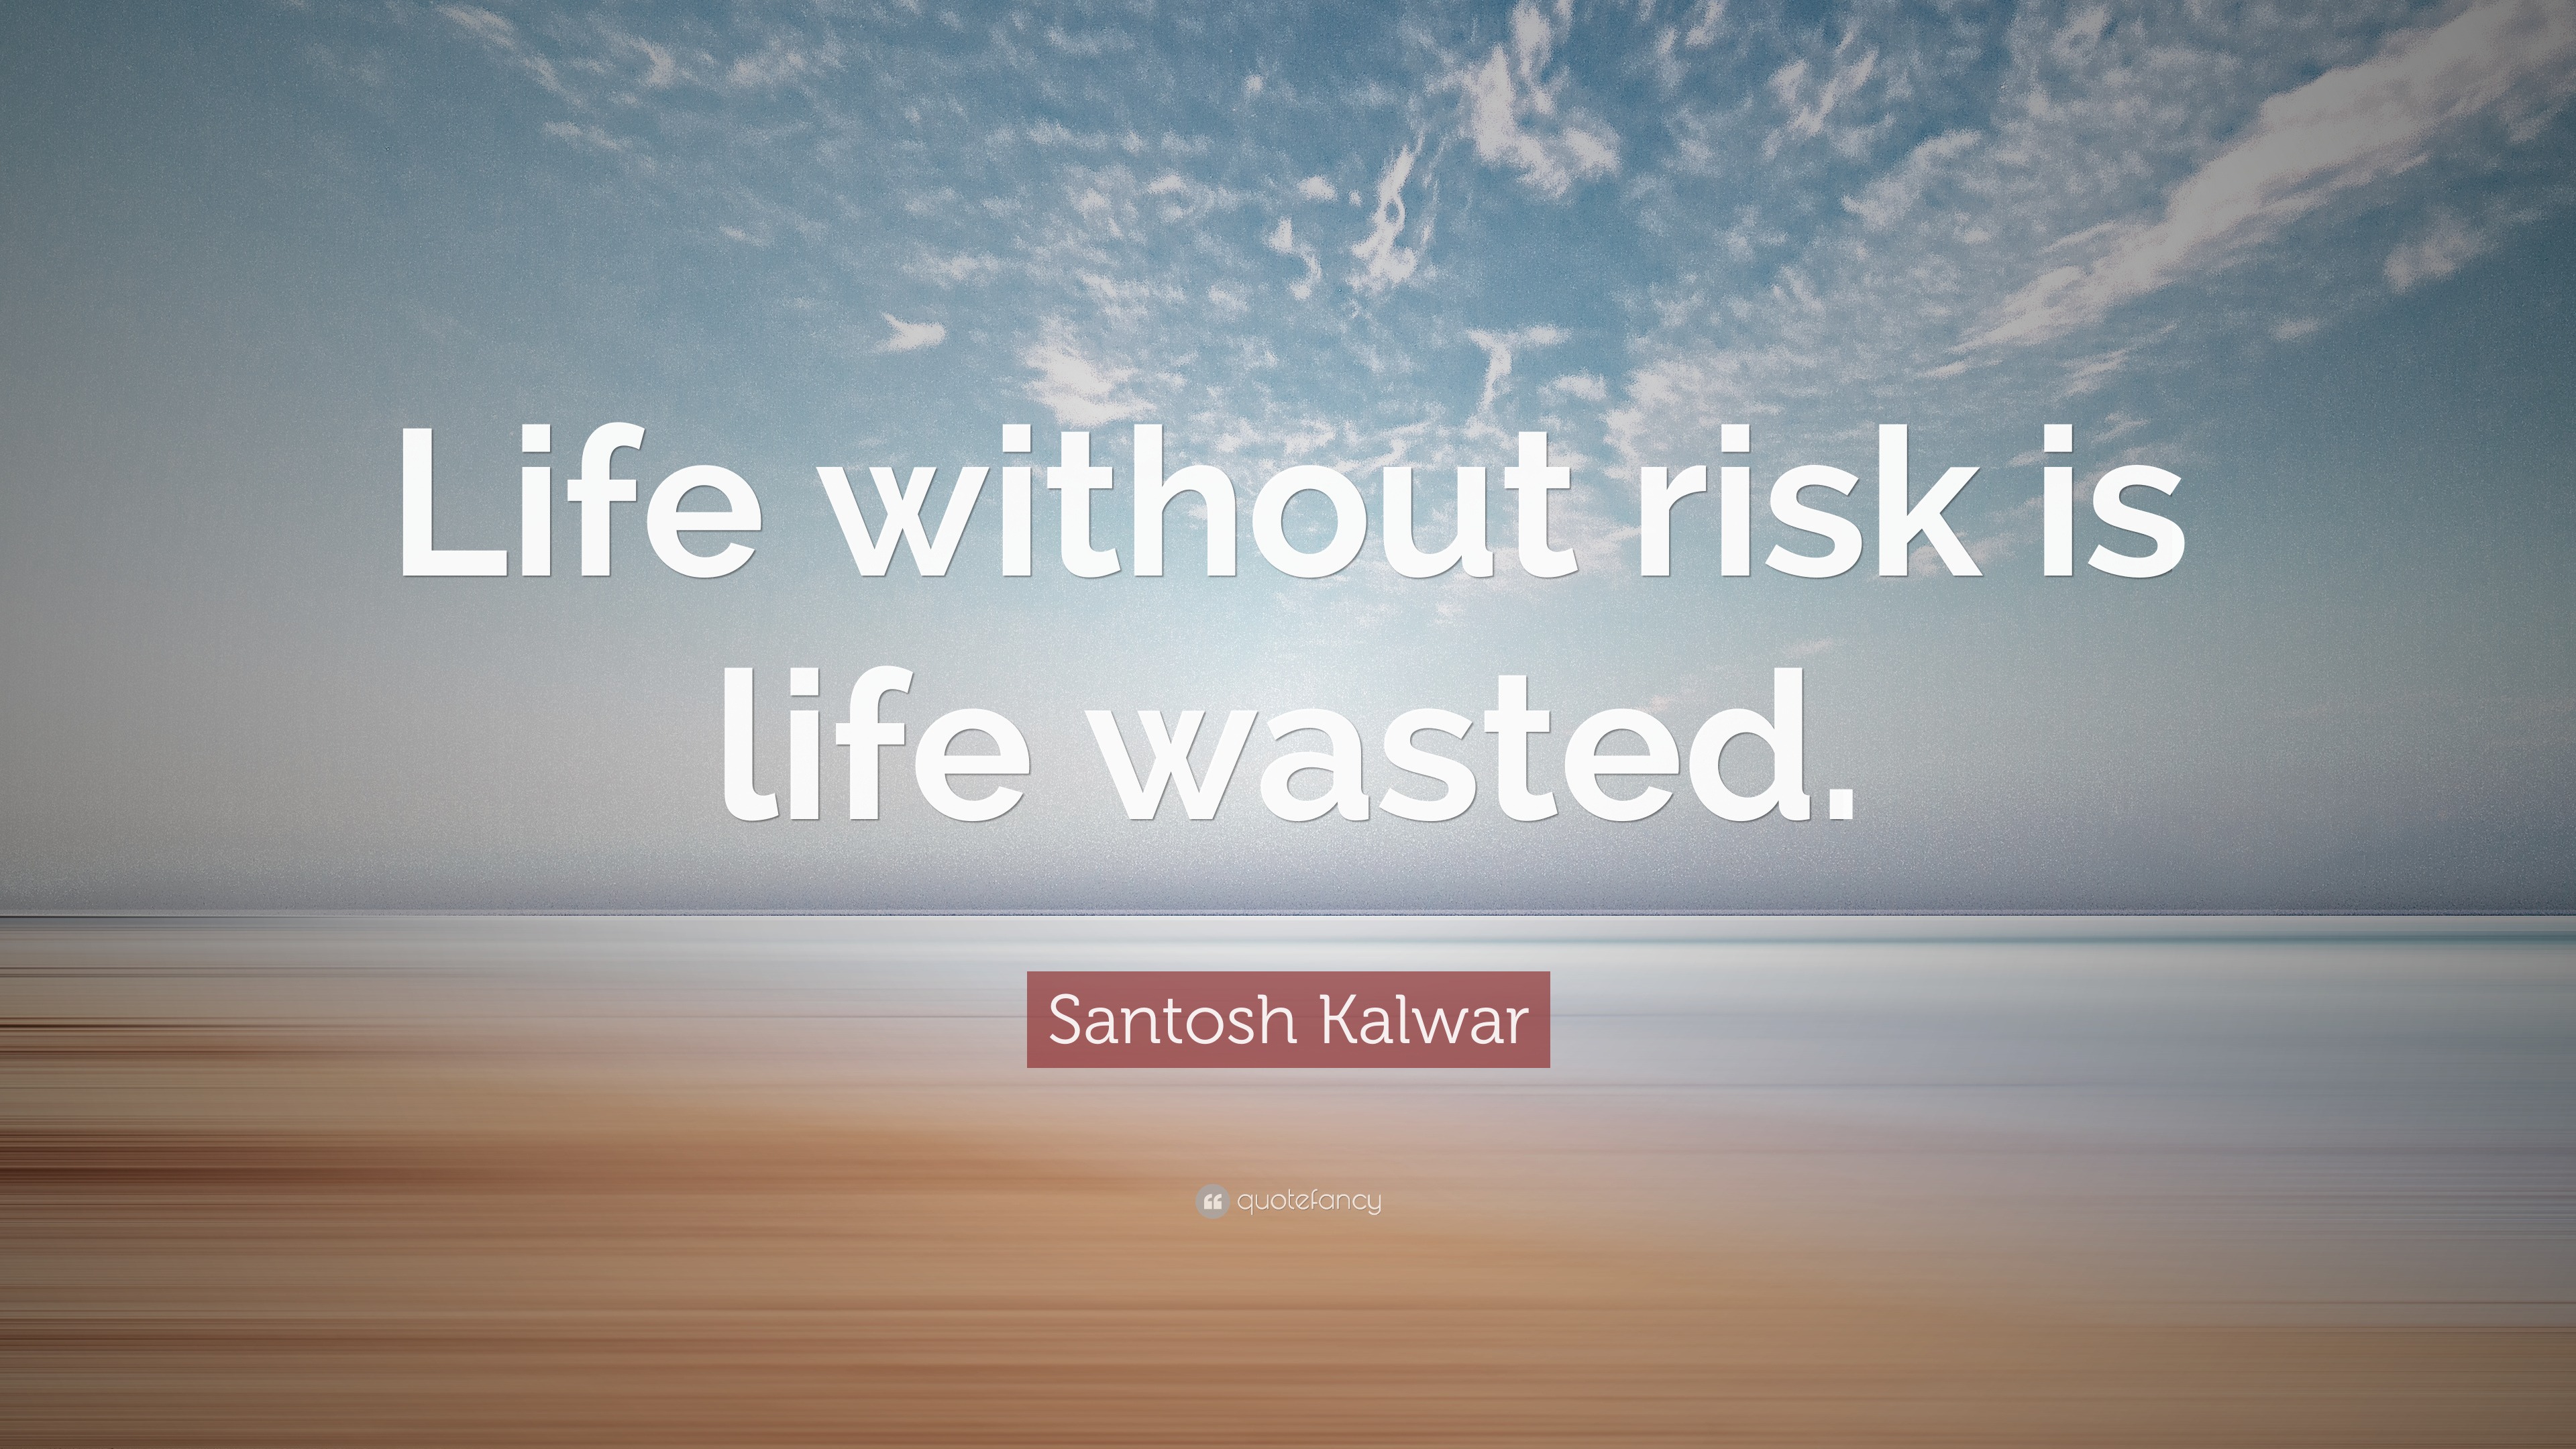 Santosh Kalwar Quote “Life without risk is life wasted ”